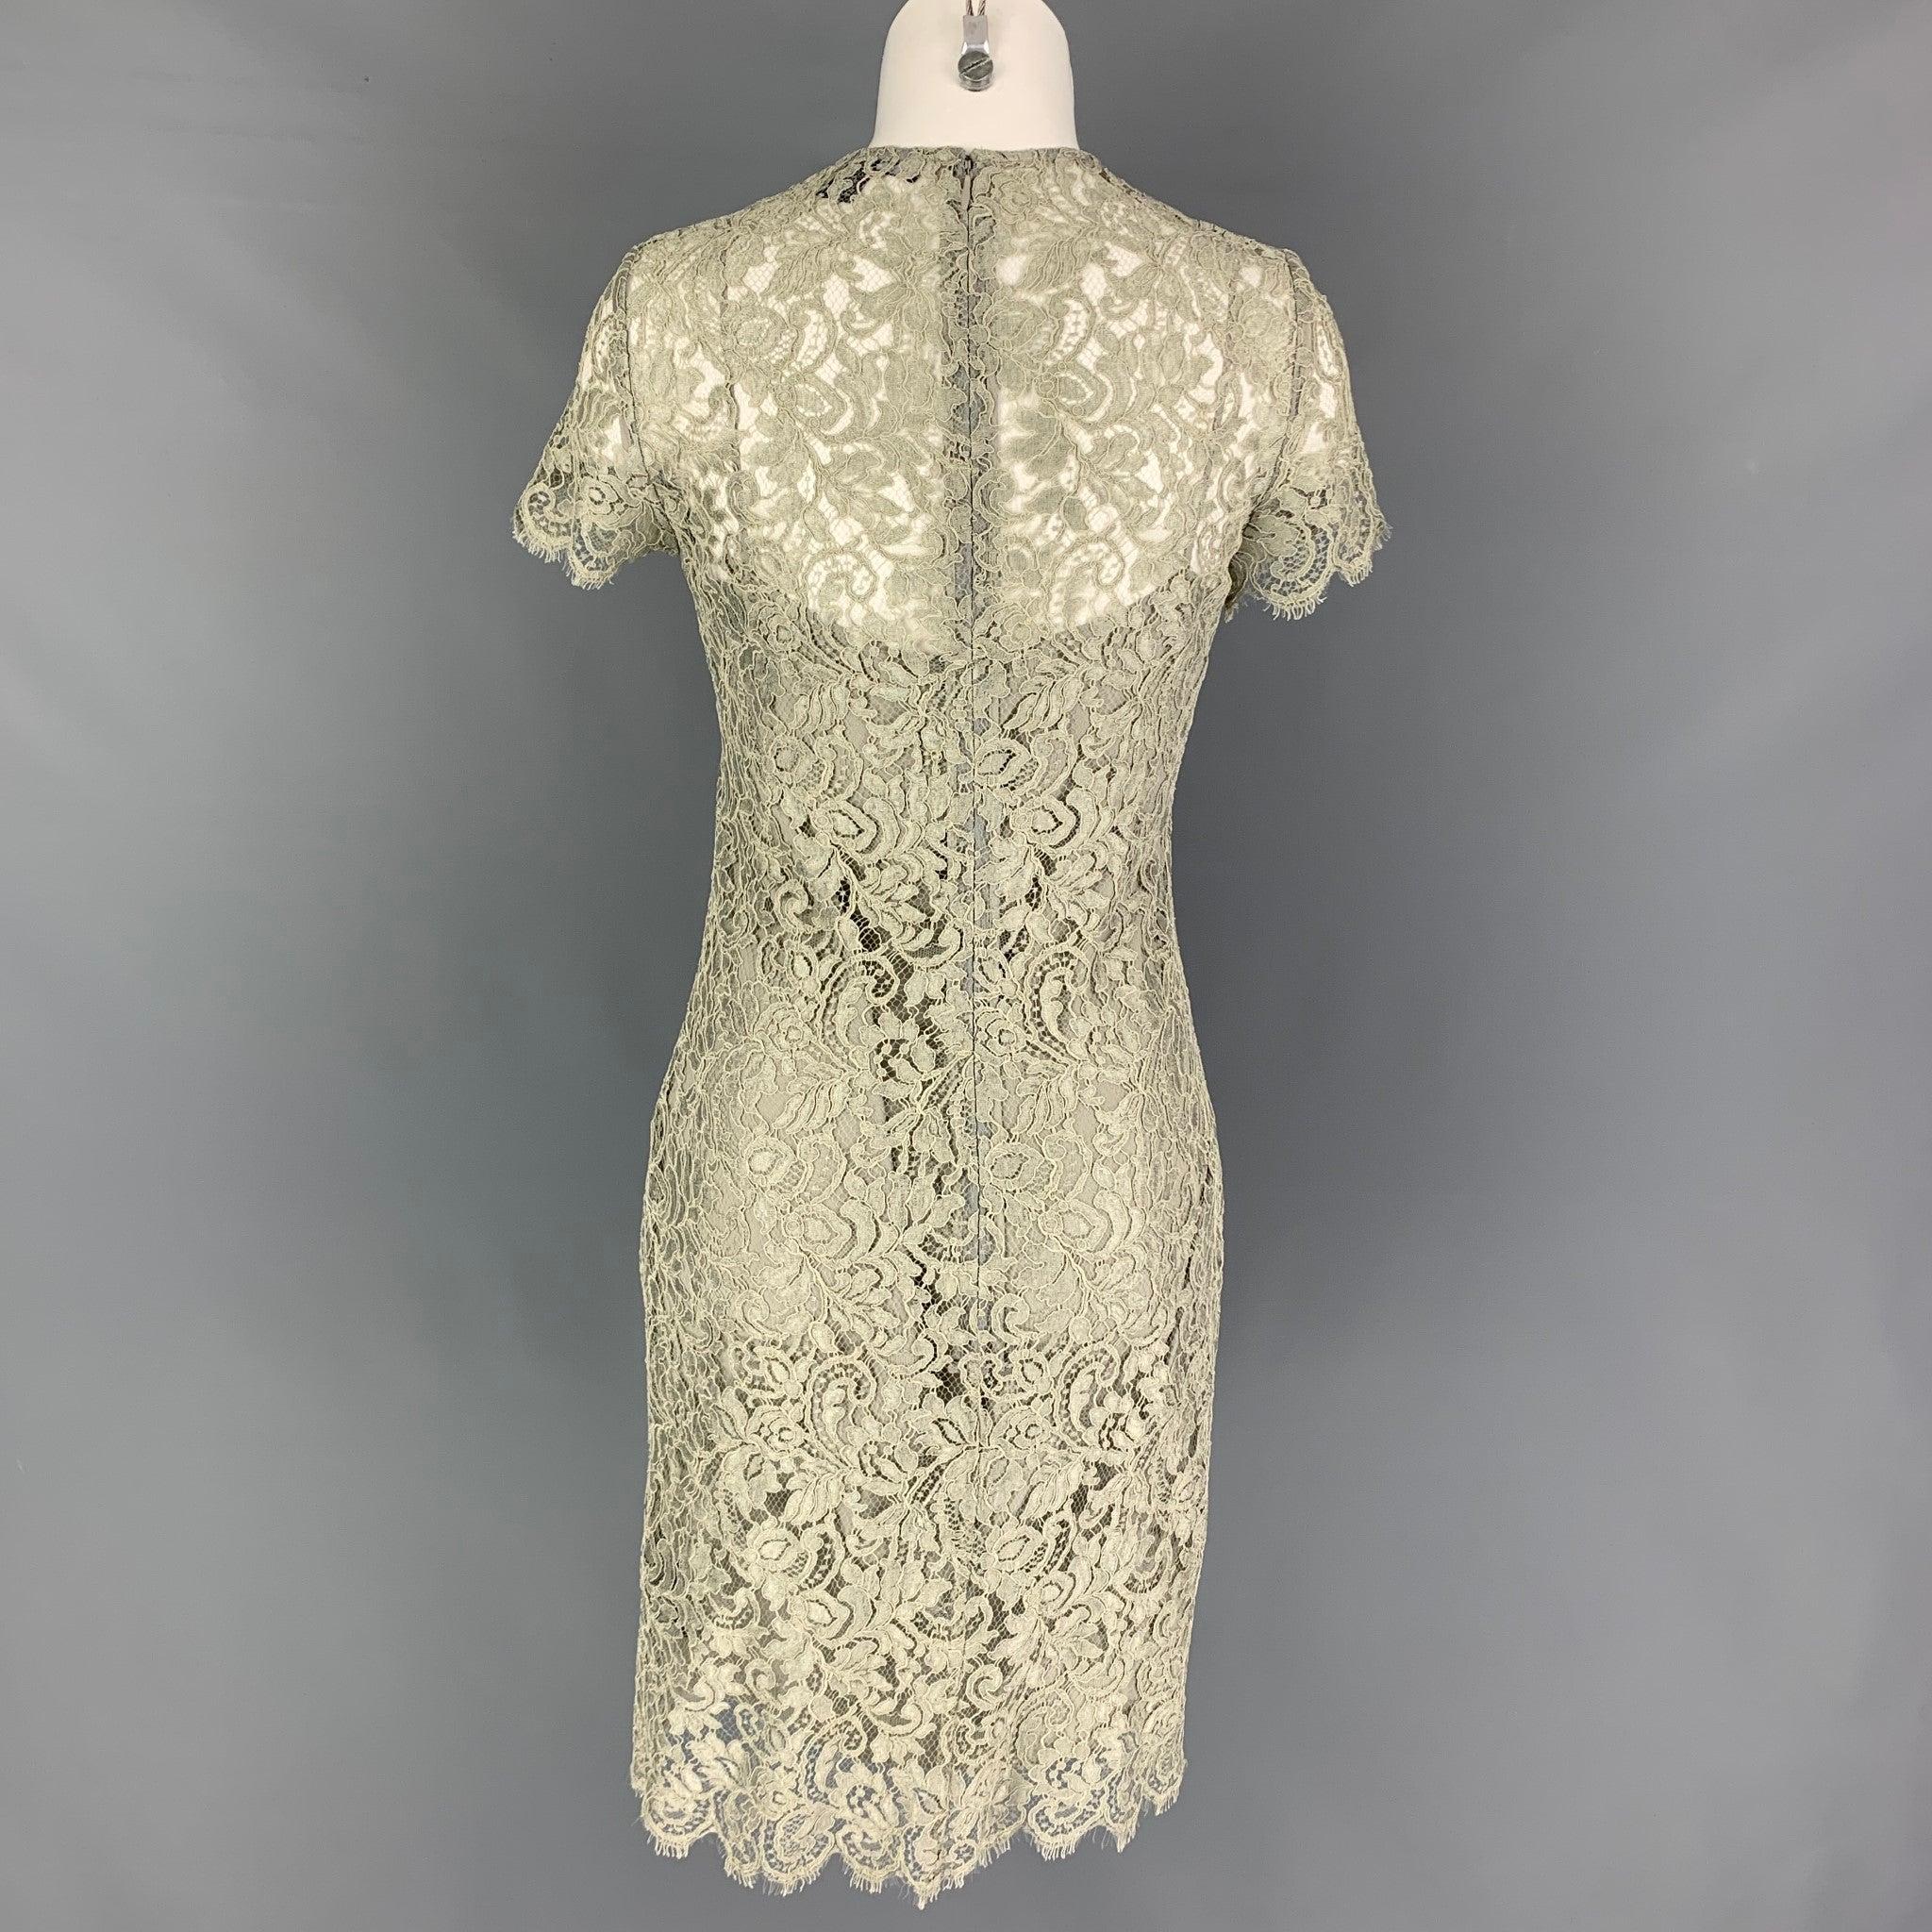 RALPH LAUREN Black Label Size 2 Moss Viscose Blend Lace Shift Dress In Good Condition For Sale In San Francisco, CA